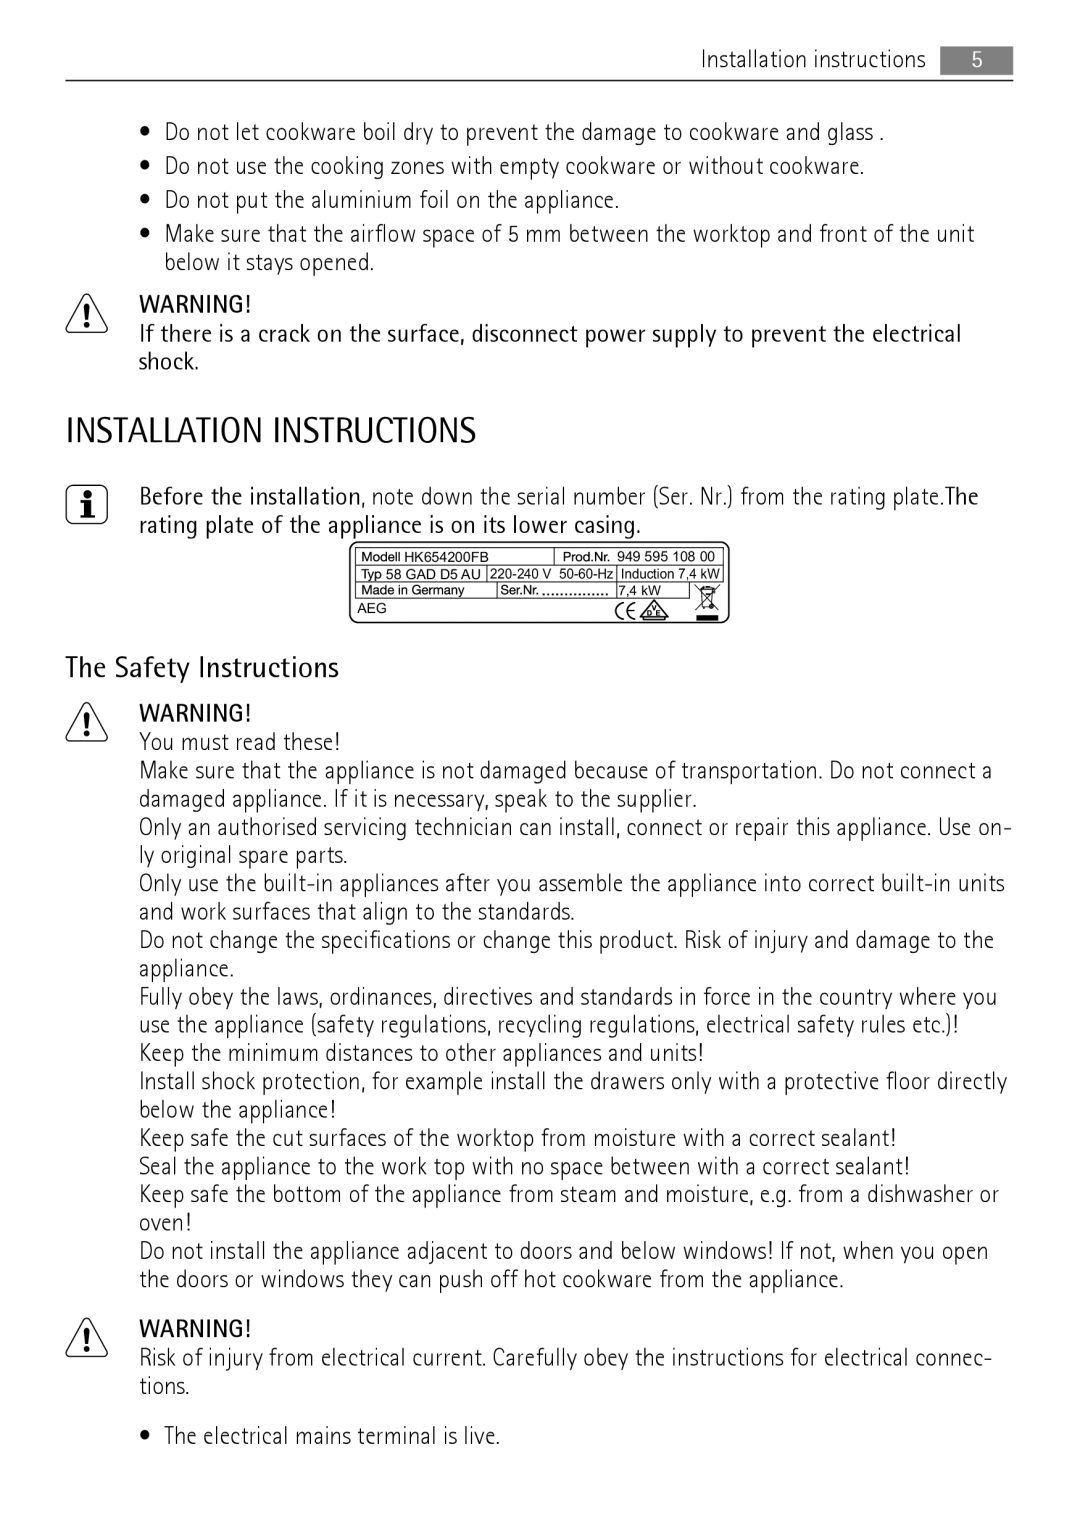 AEG HK654200FB user manual Installation Instructions, The Safety Instructions 